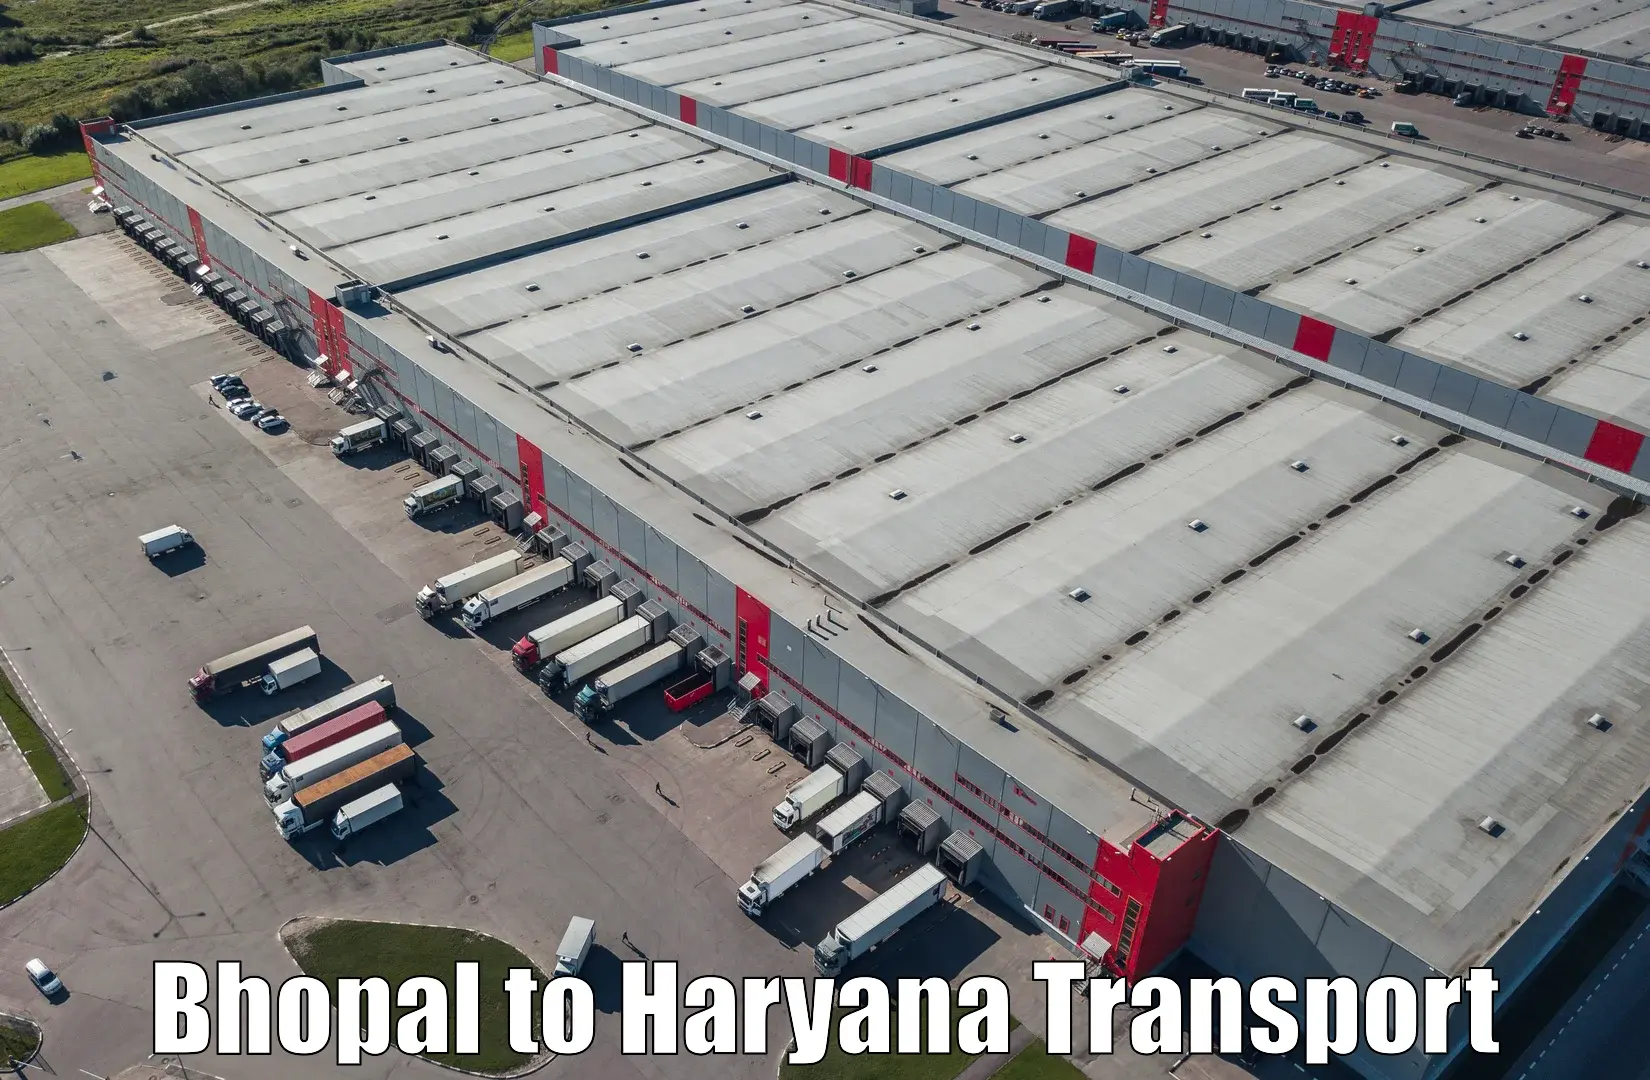 Domestic transport services Bhopal to Bilaspur Haryana